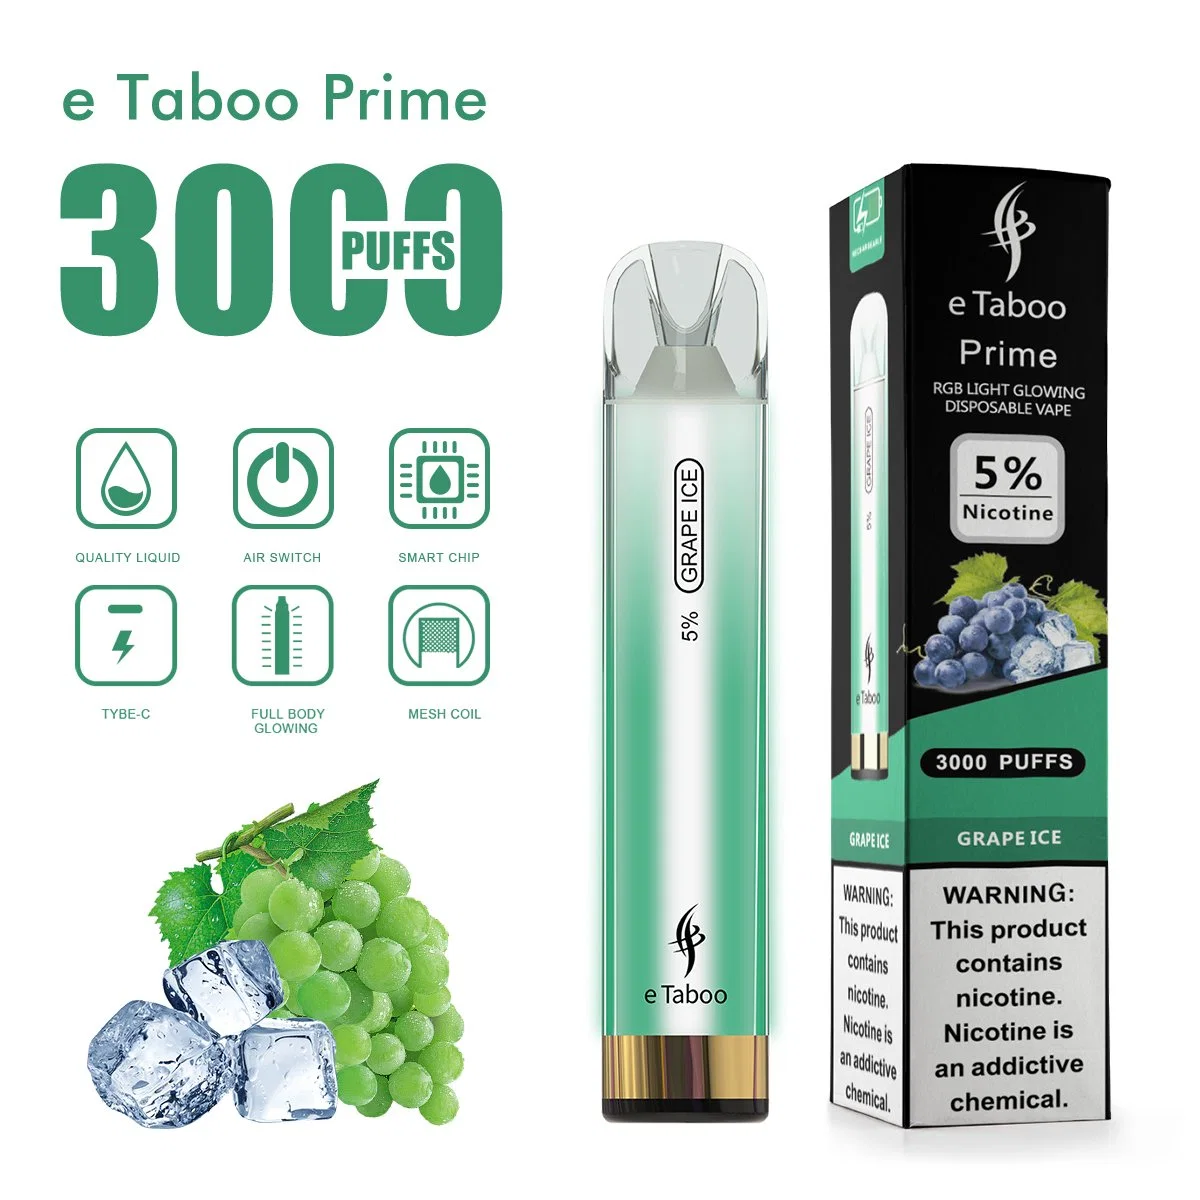 E Taboo Prime 3000 Puffs Mesh Coil Electronic Cigarette Disposable/Chargeable Glow Vape Rechargeable